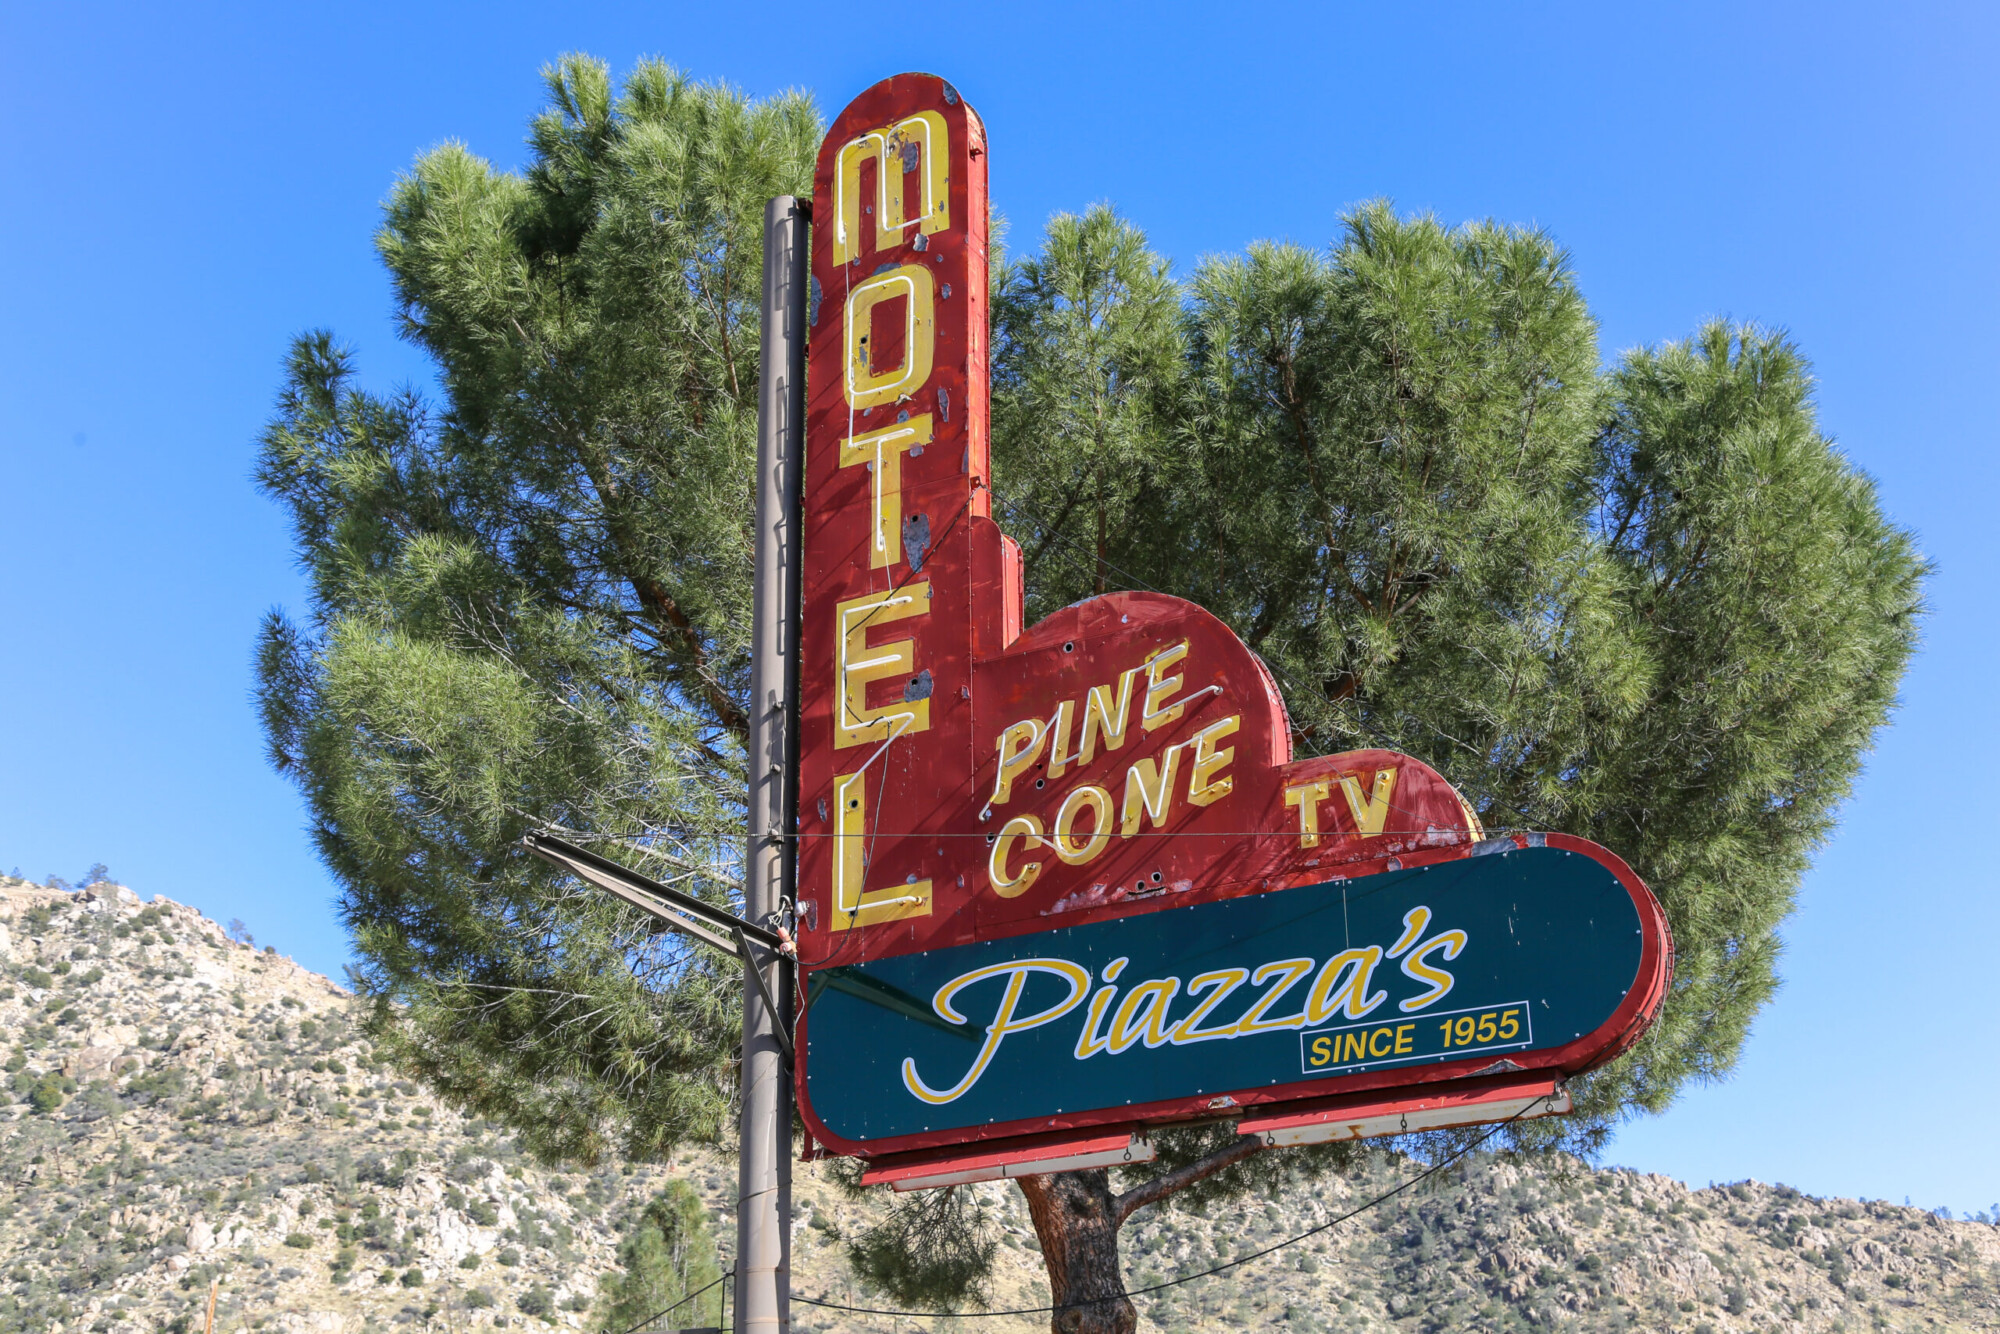 Photo of the the road sign set against a lone tree at a motel called Piazza's Pine Cone Inn in Kernville, California.